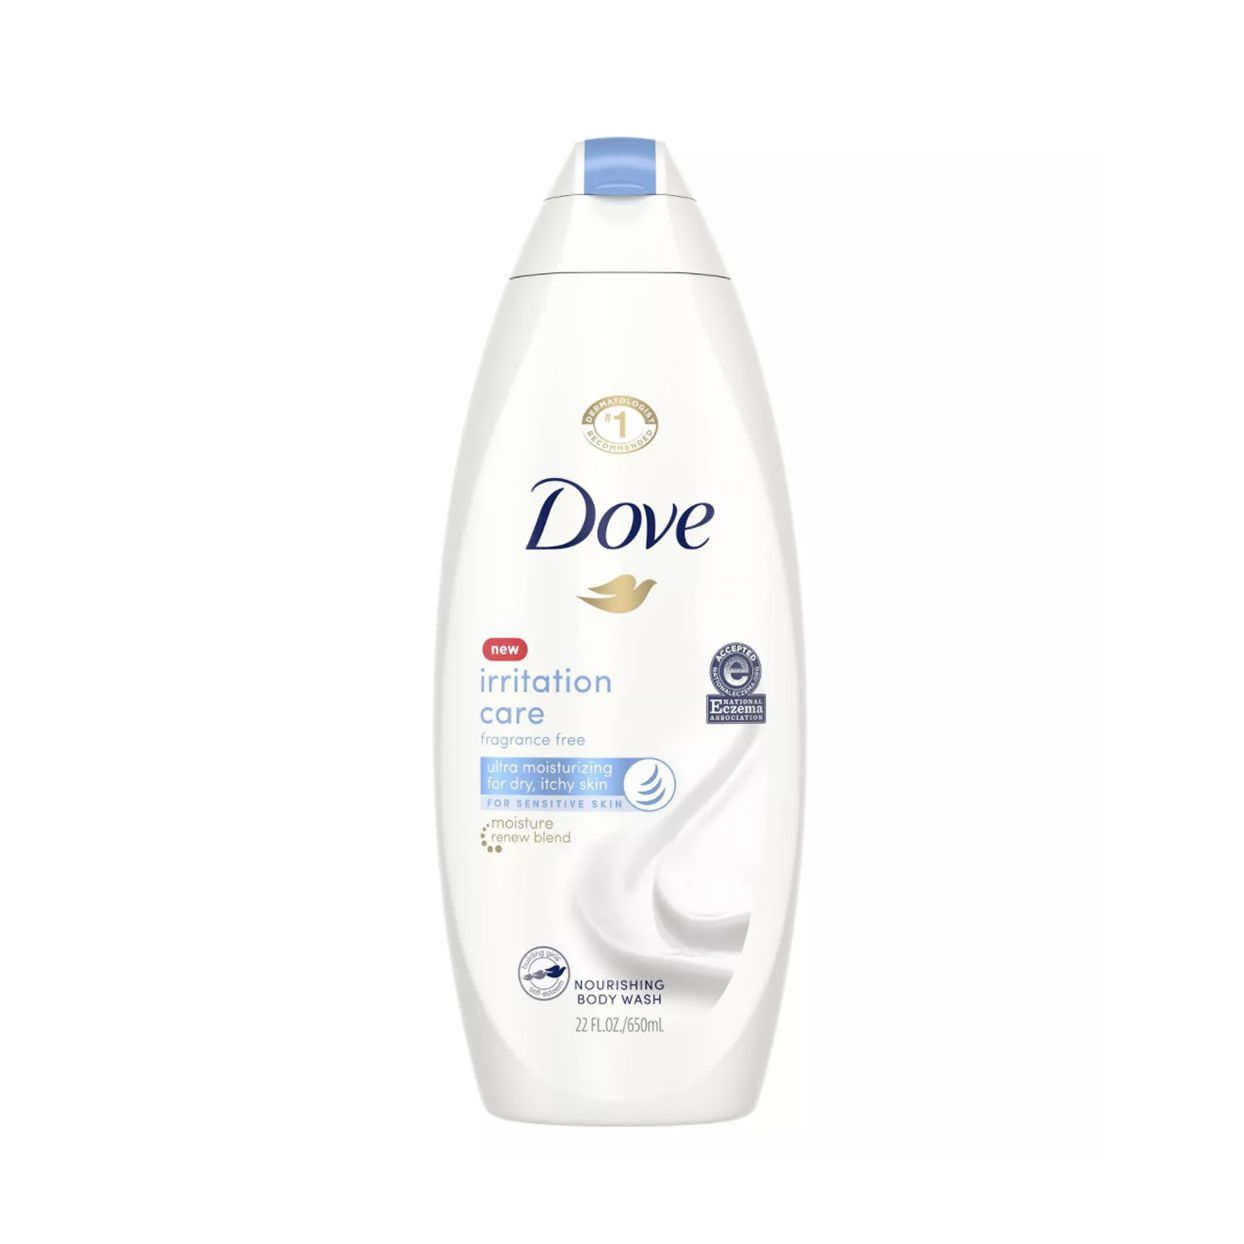 Dove Irritation Care Body Wash for Dry or Itchy Sensitive Skin